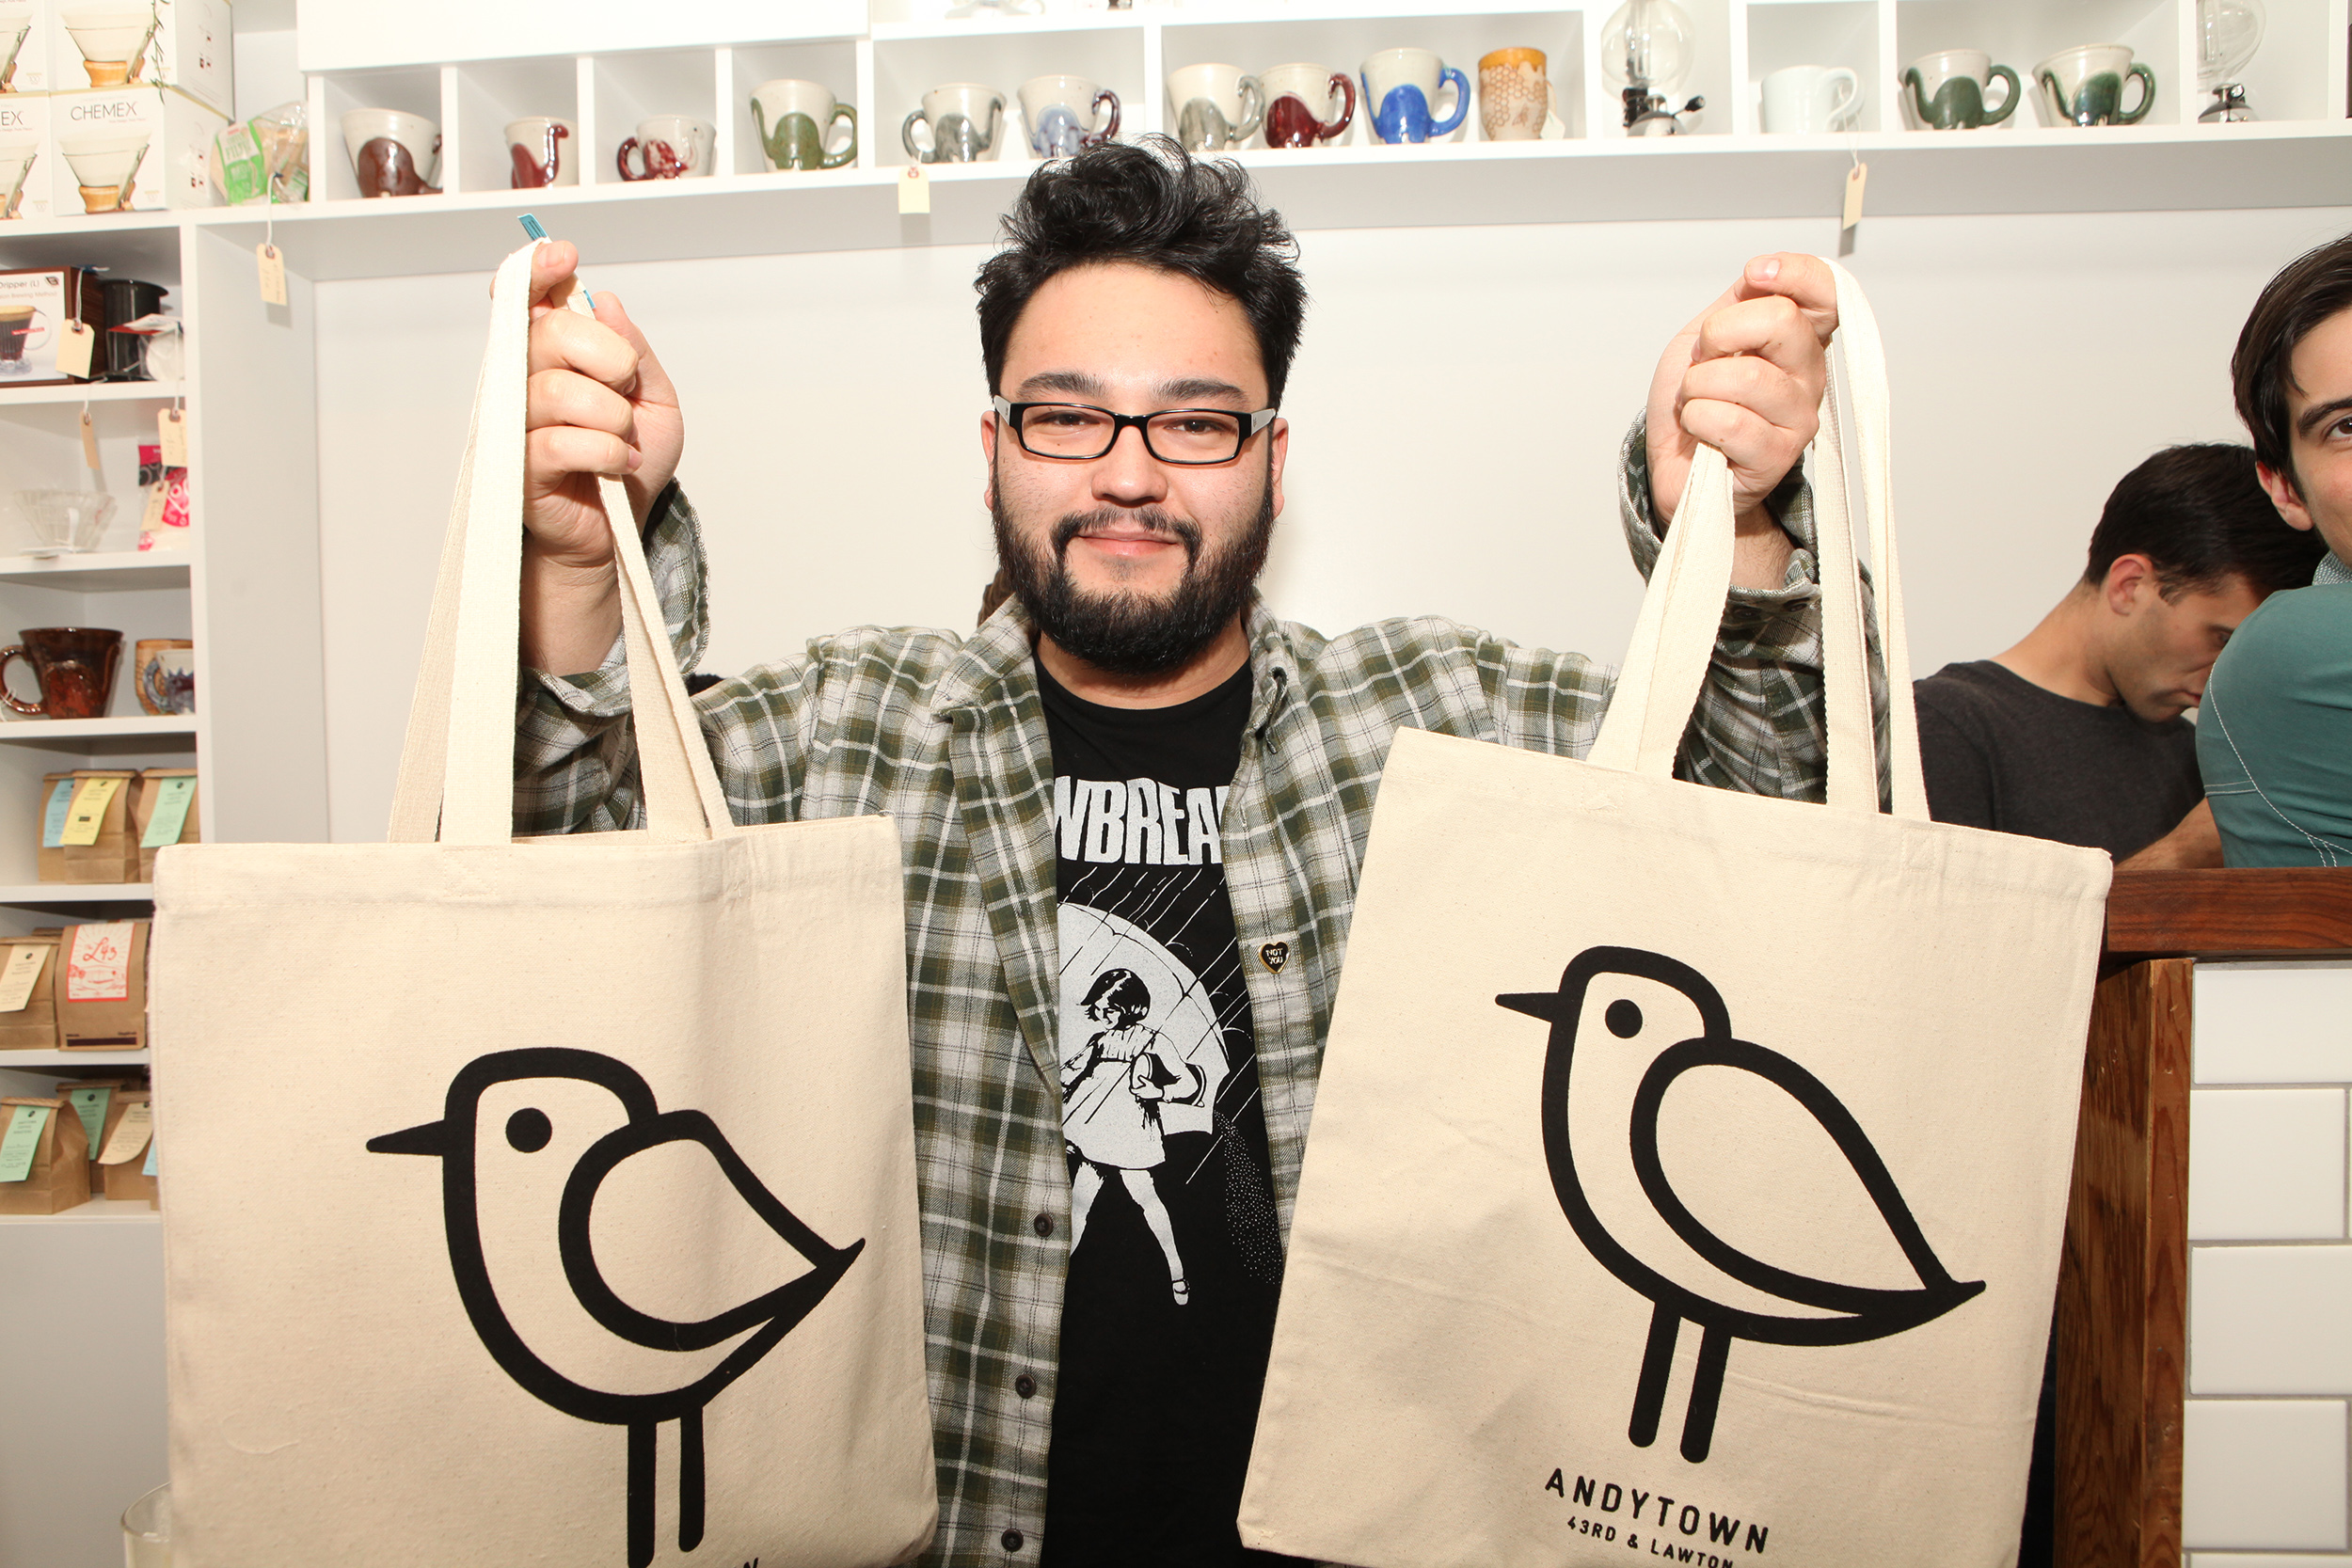 Some of Andytown's bird merch. (Photo courtesy Andytown Coffee Roasters.)